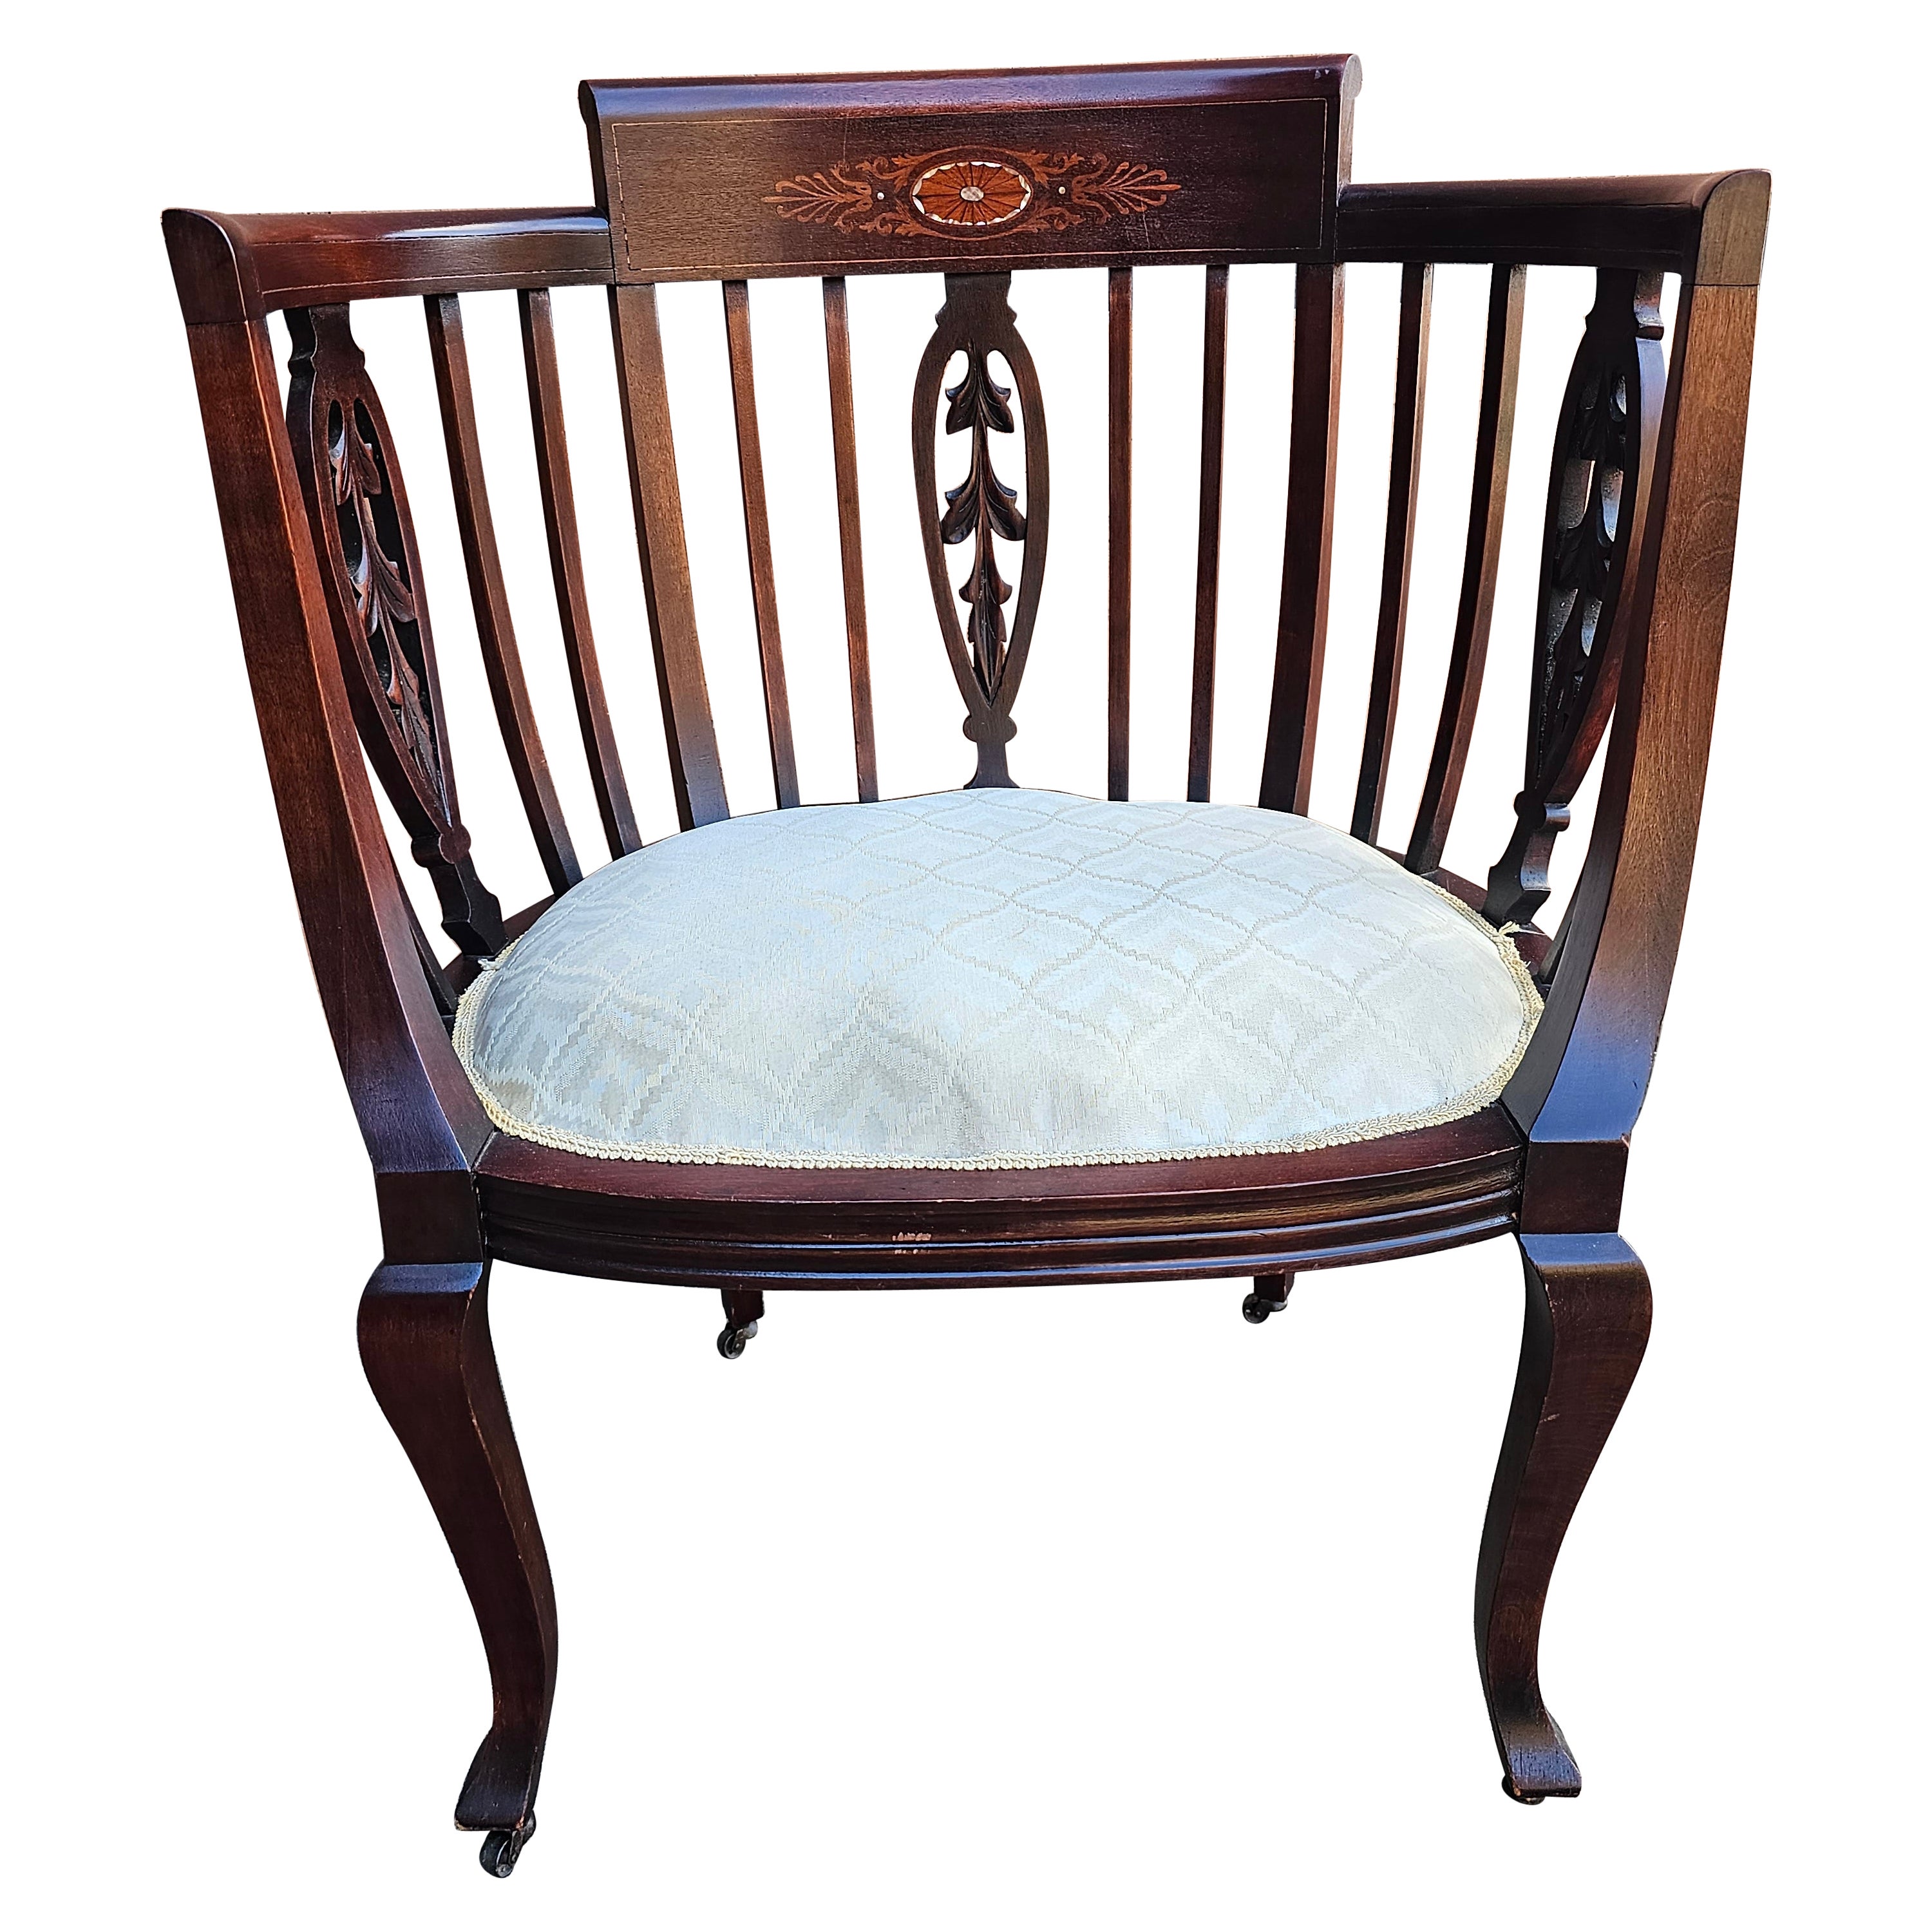 Early 20th Century Edwardian Inlaid Mahogany and Upholstered Seat Barrel Chair For Sale